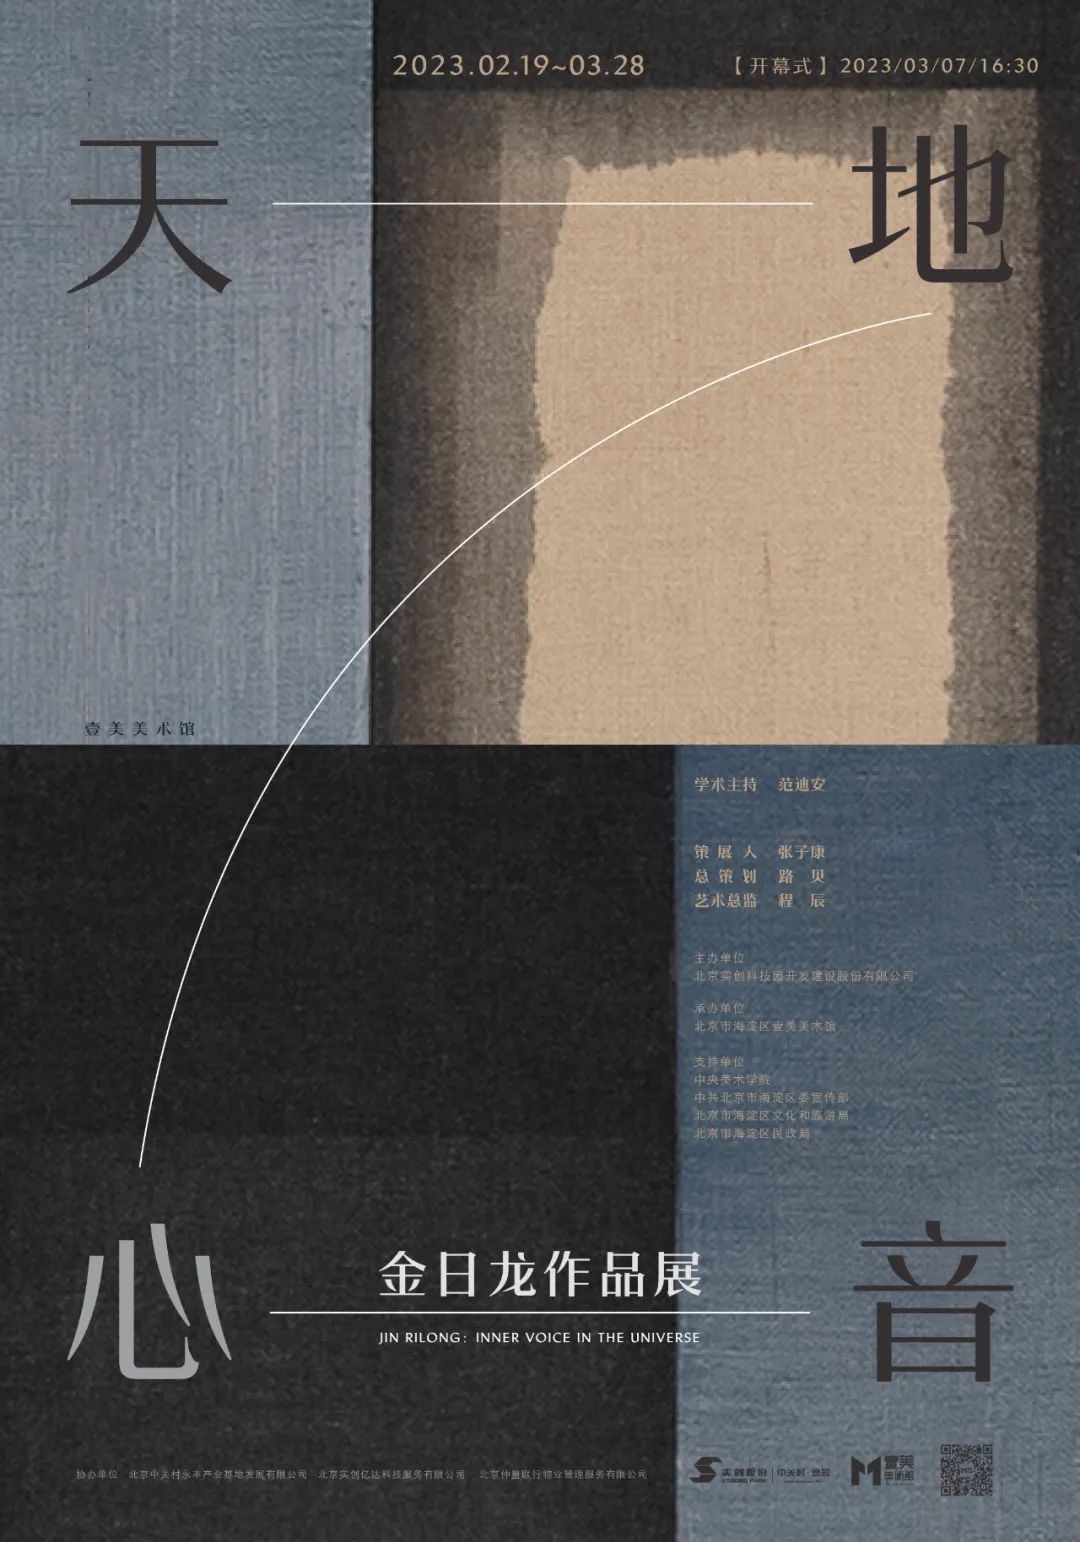 Culture Beat: ‘Jin Rilong: Inner Voice in the Universe’ comes to Beijing